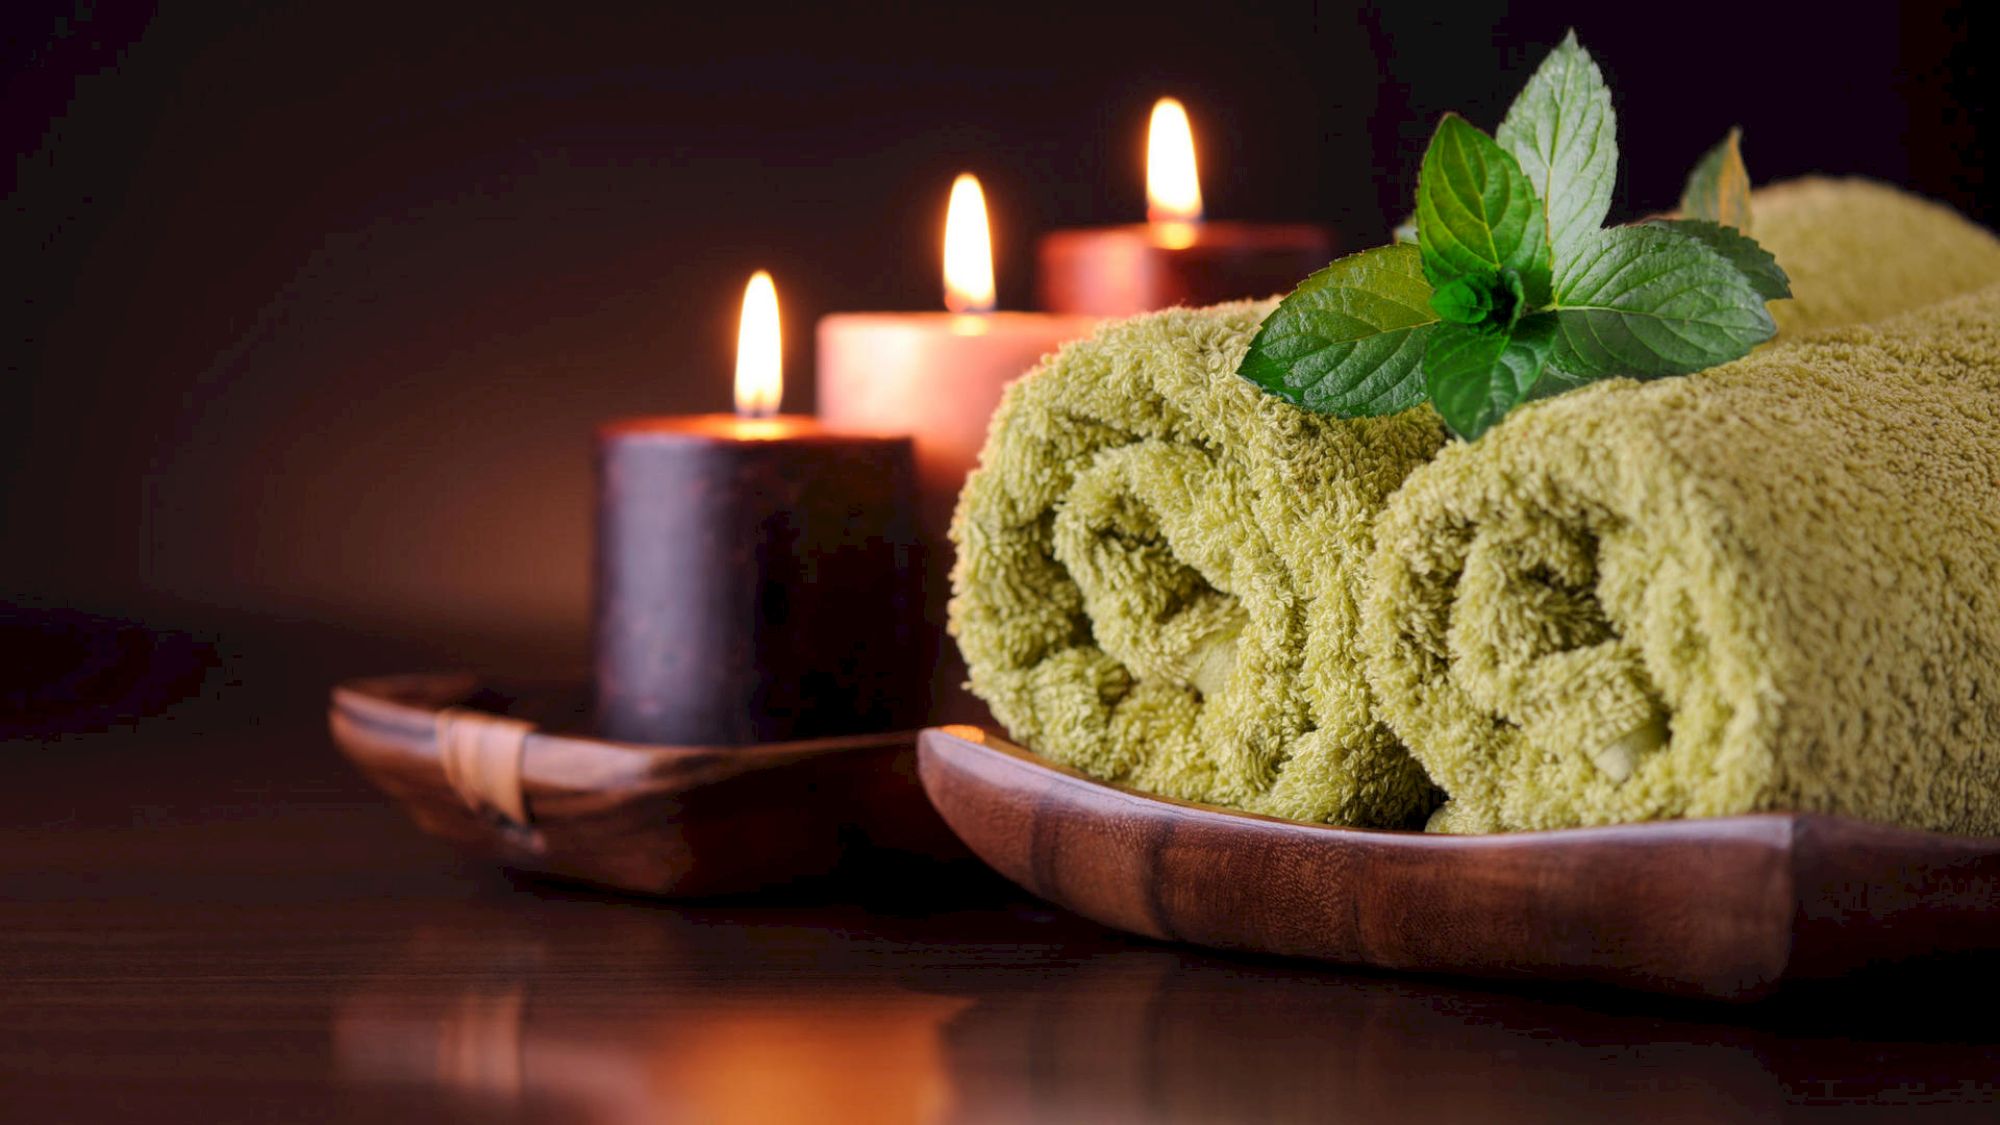 A spa setup with lit candles, rolled green towels, and fresh mint leaves, all placed on a wooden surface for a relaxing ambiance.